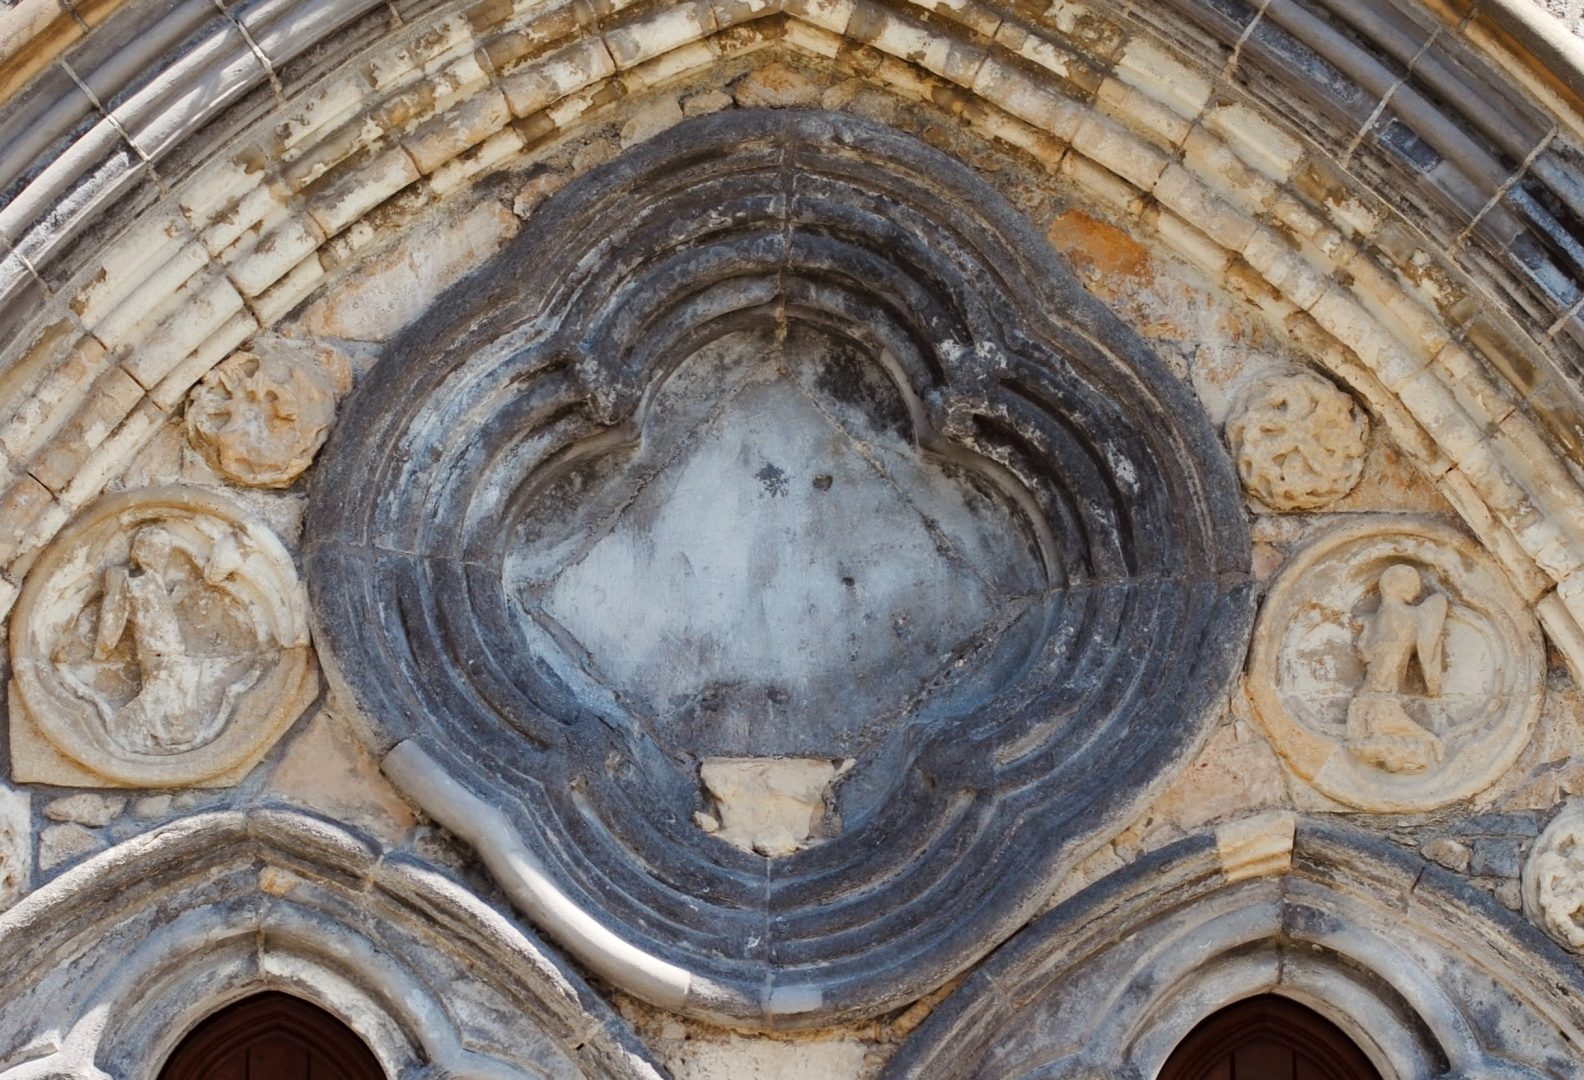 Quatrefoil shape carved into what looks like an old church building